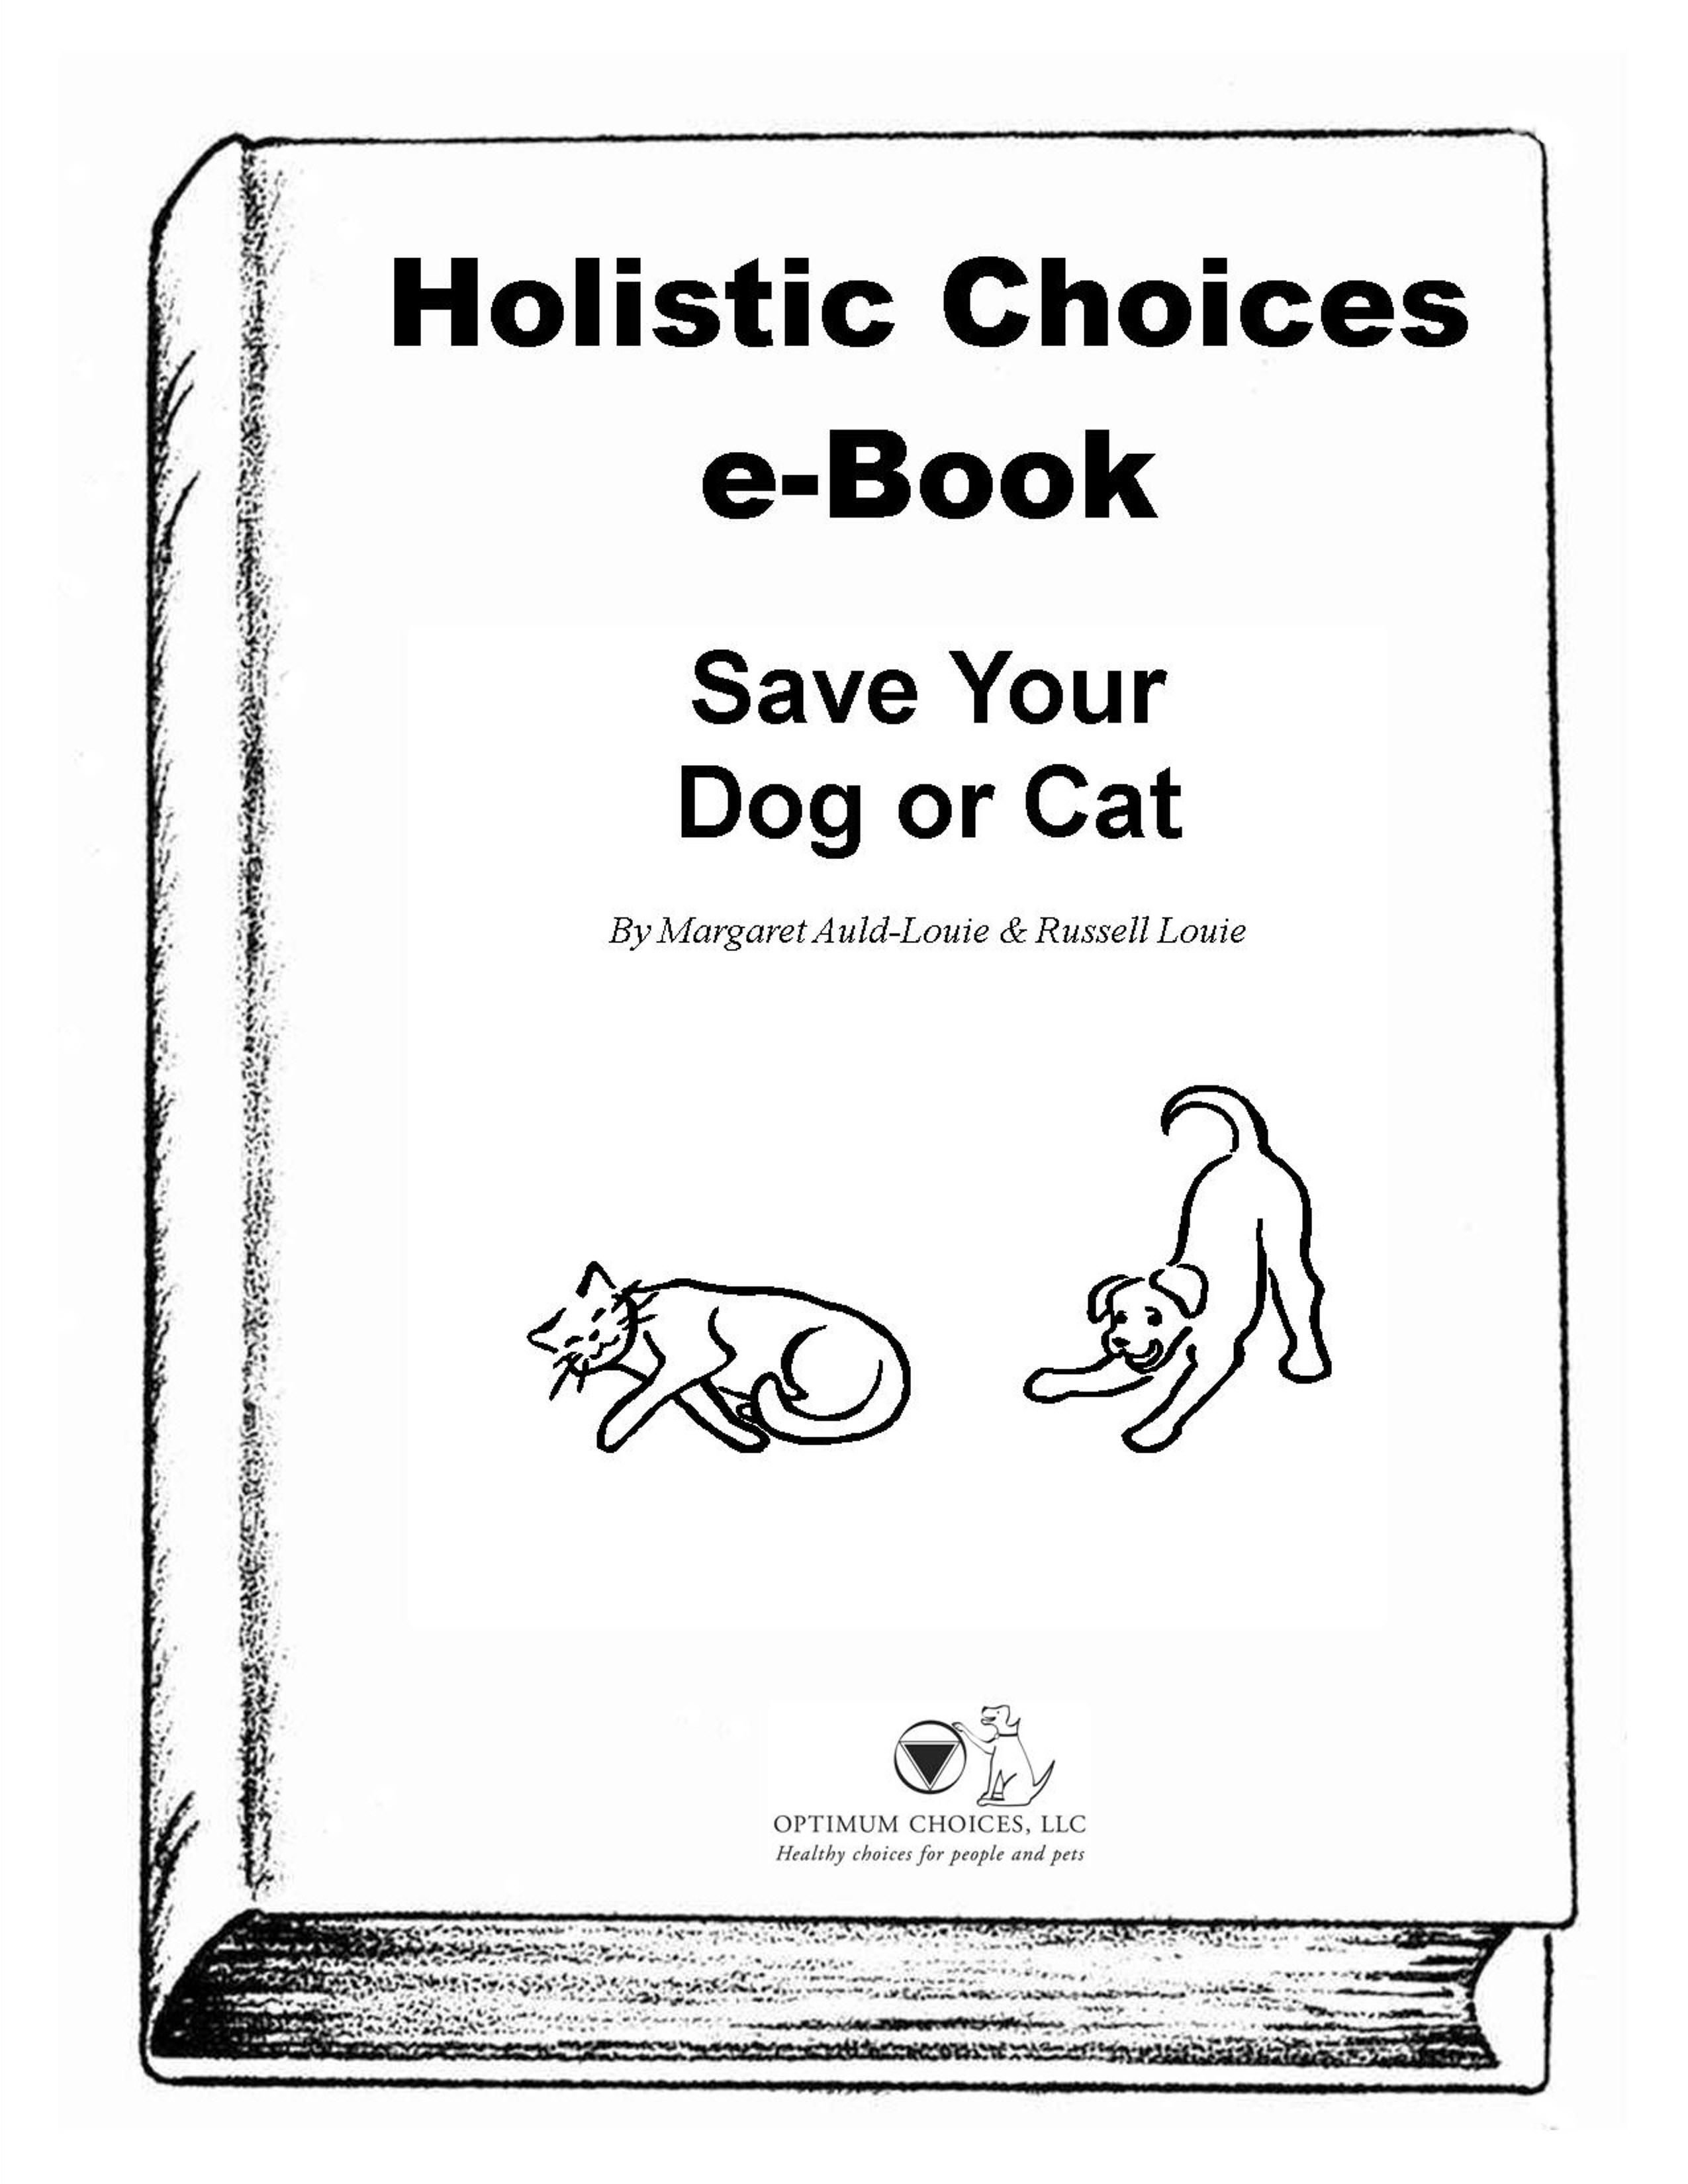 Save Your Dog or Cat e-Book